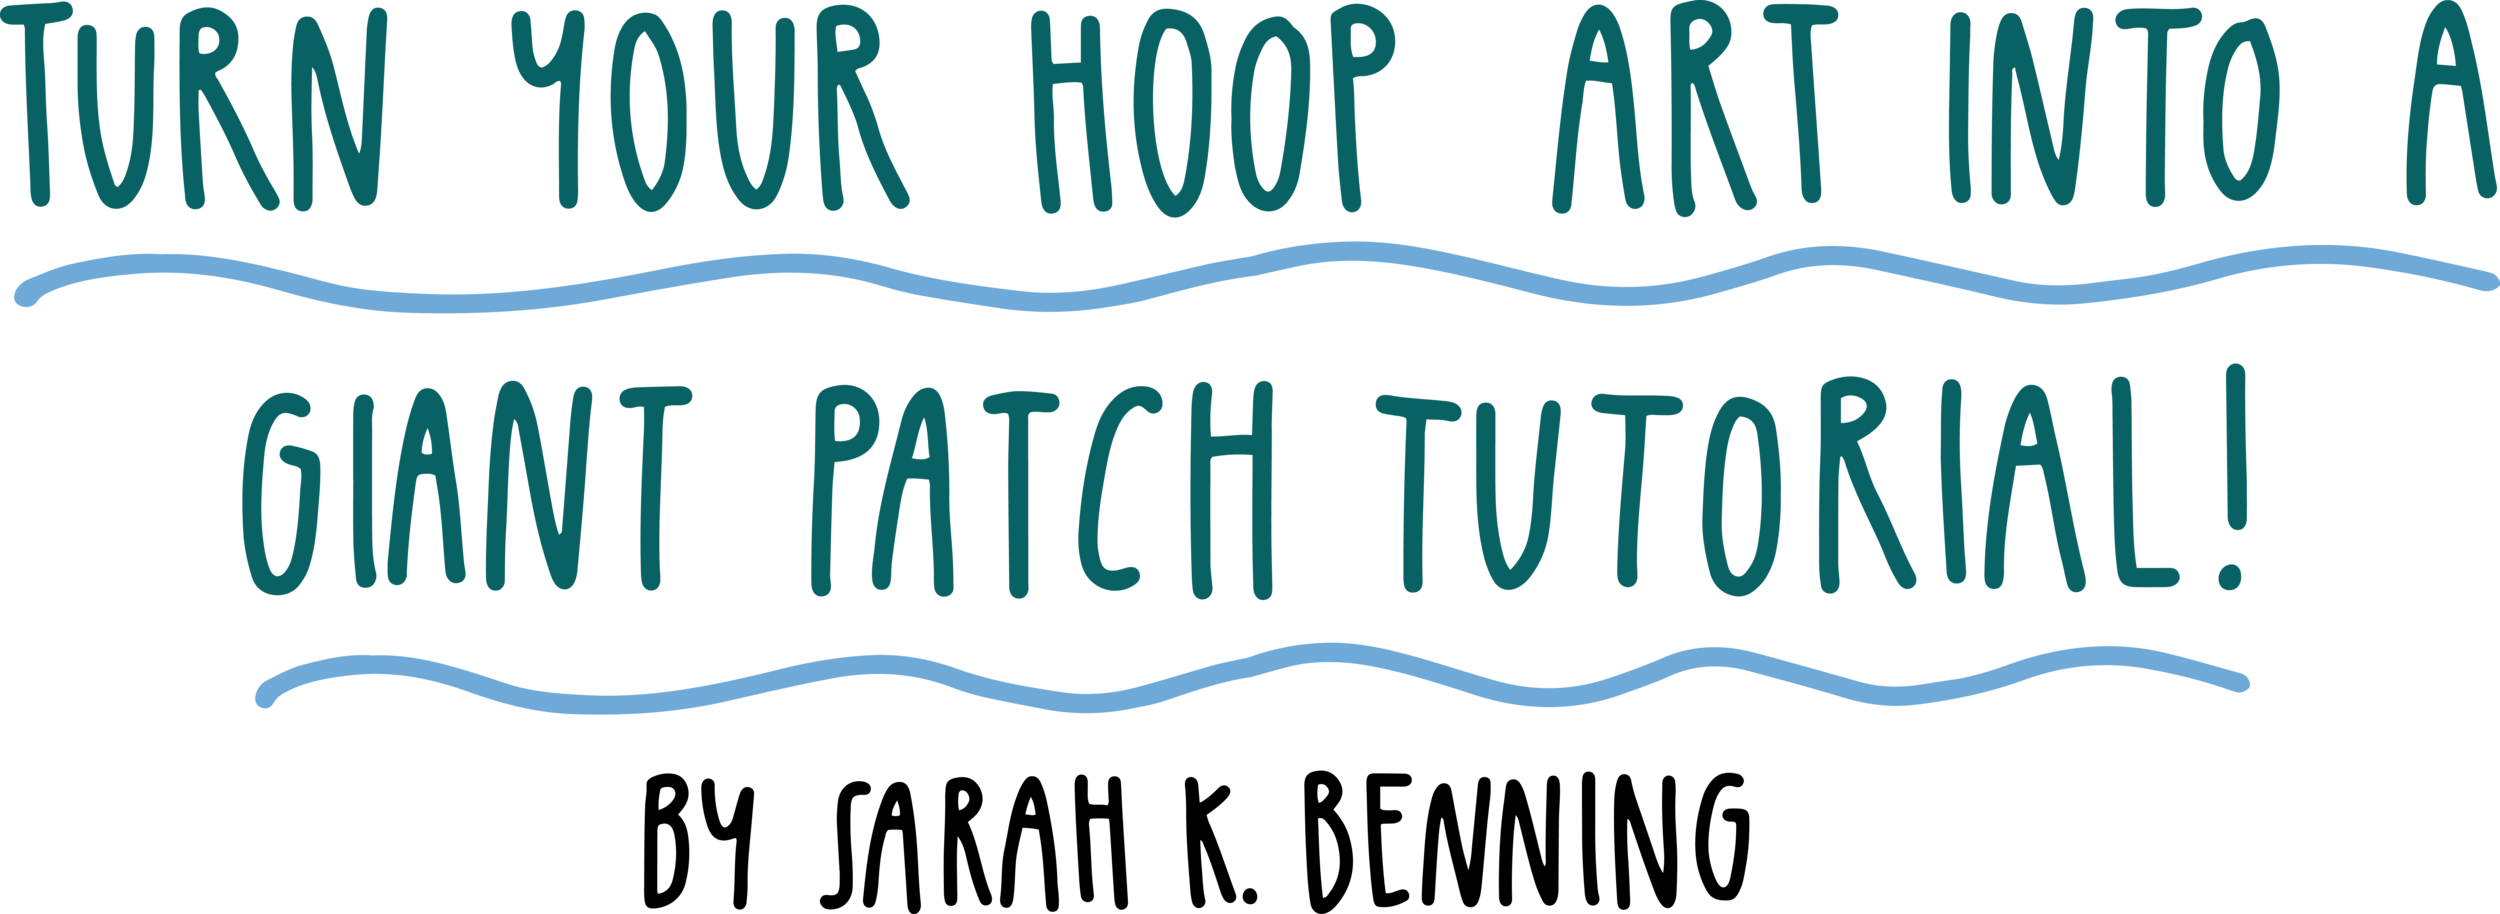 DIY Turn Your Hoop Art Into A Giant Patch Tutorial! — Sarah K. Benning  Contemporary Embroidery